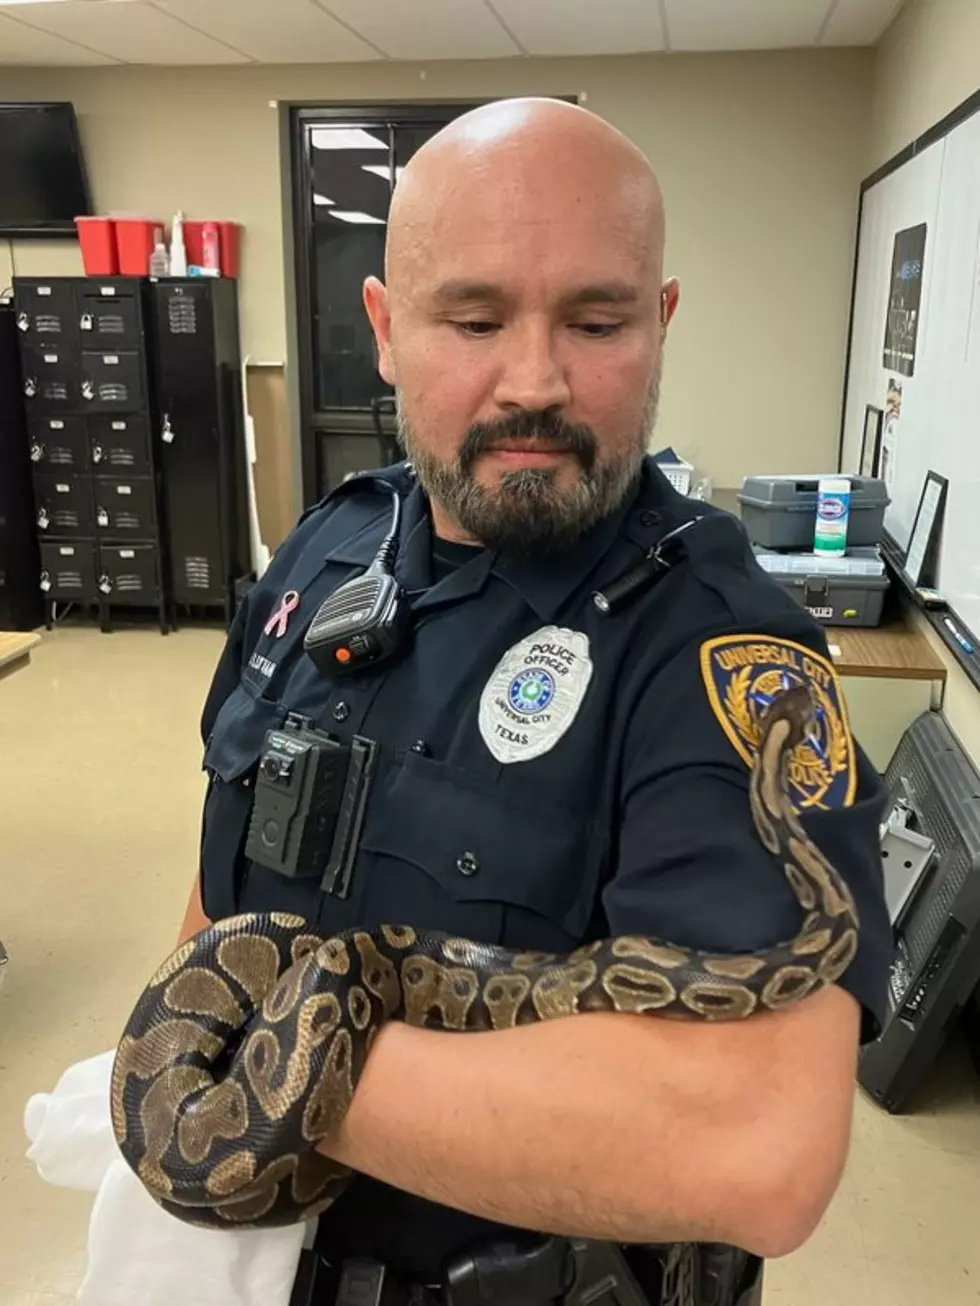 Hissy Fit: Surprise Snake in Universal City, Texas Home Was a Python